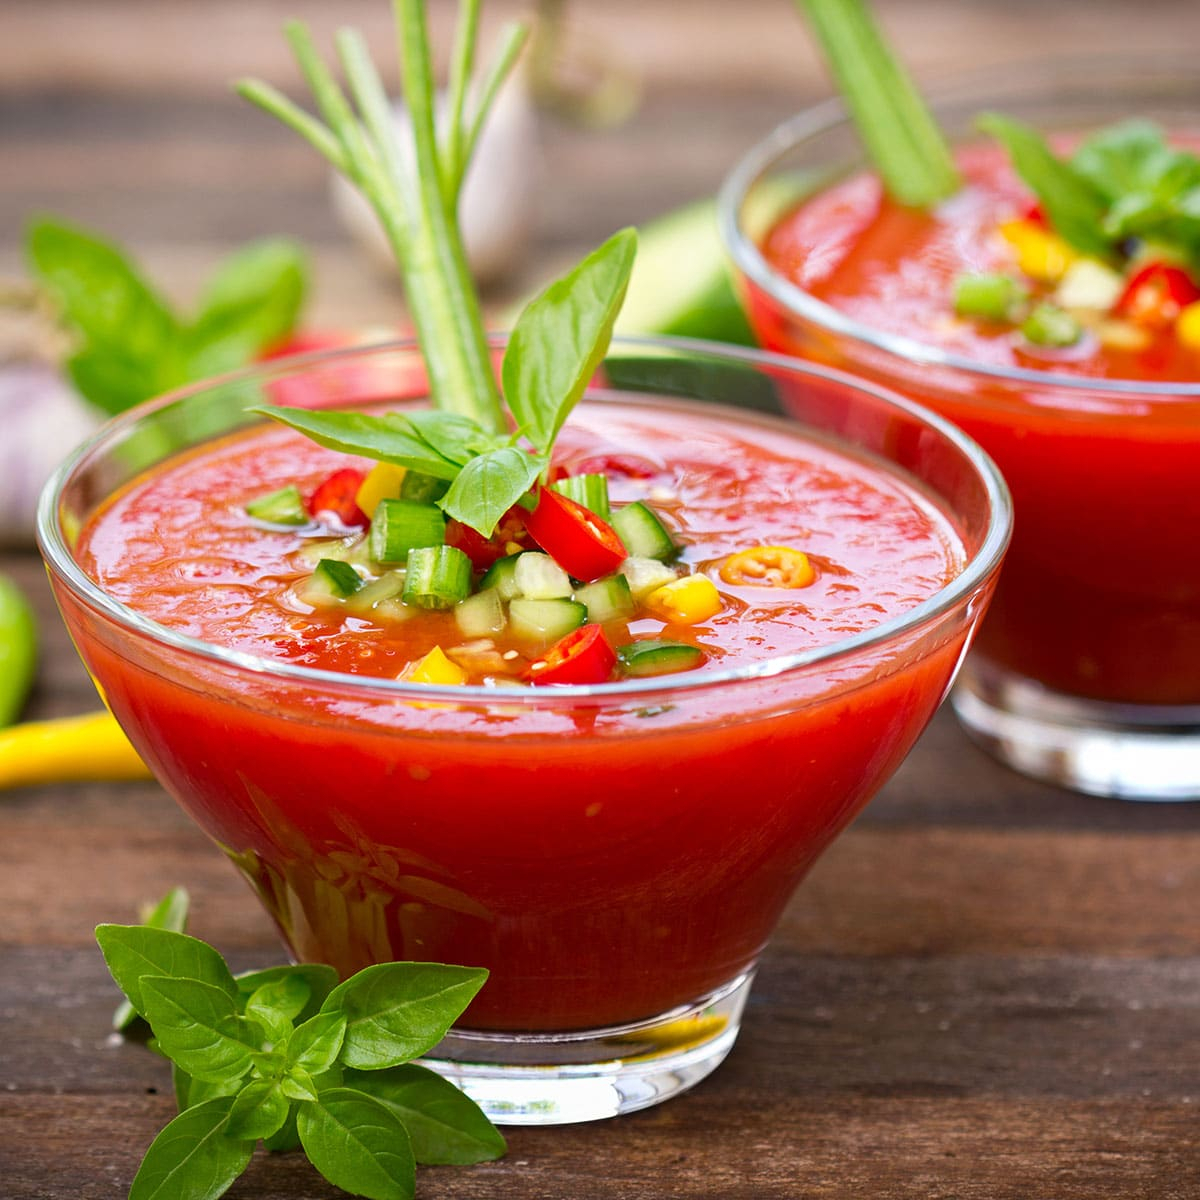 National Gazpacho Day - December 6, 2021 | National Today